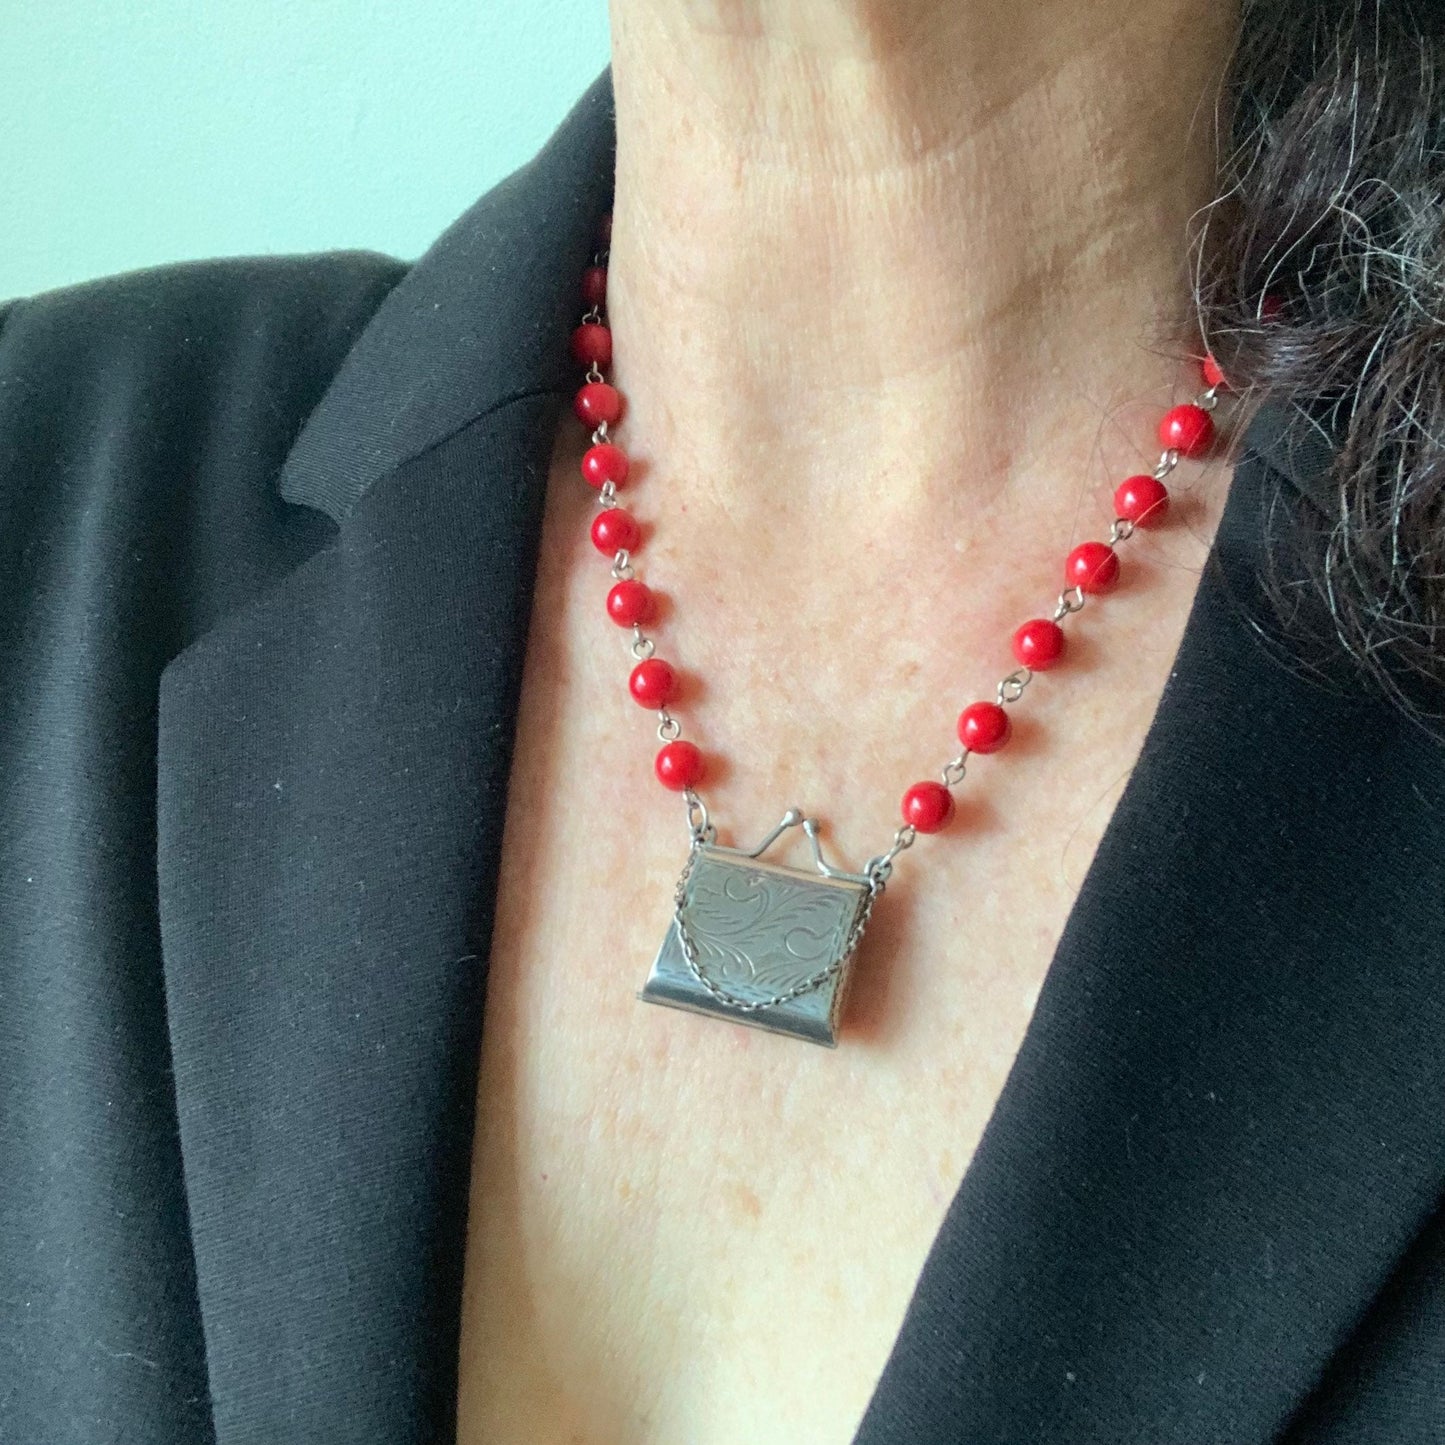 Vintage locket statement necklace - red coral beaded necklace - unique boho jewelry - Adjustable length necklace with purse-shaped locket